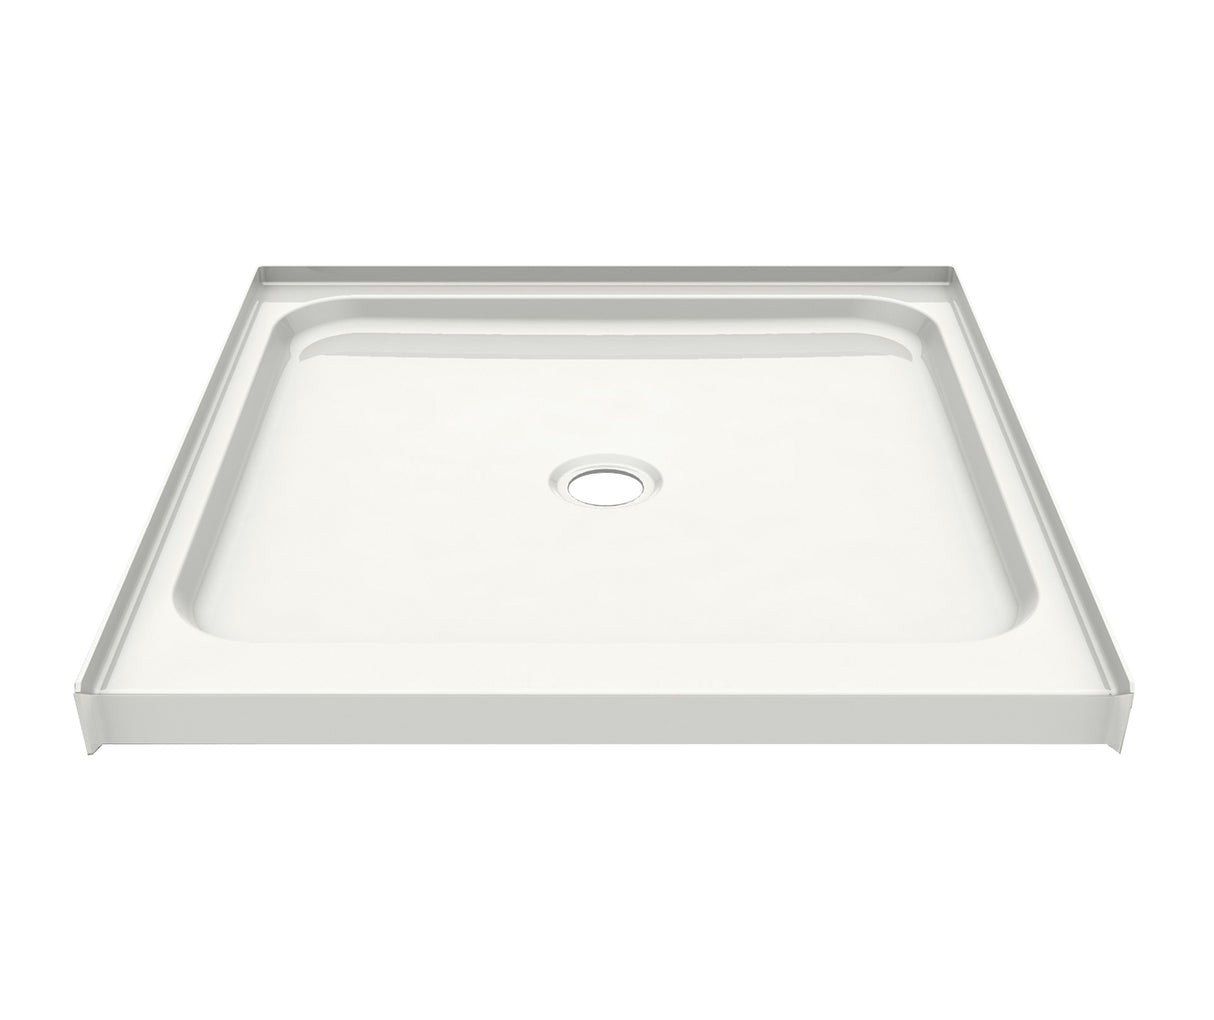 MAAX 145020-000-002-083 SPL 3232 AcrylX Alcove Shower Base with Center Drain in White